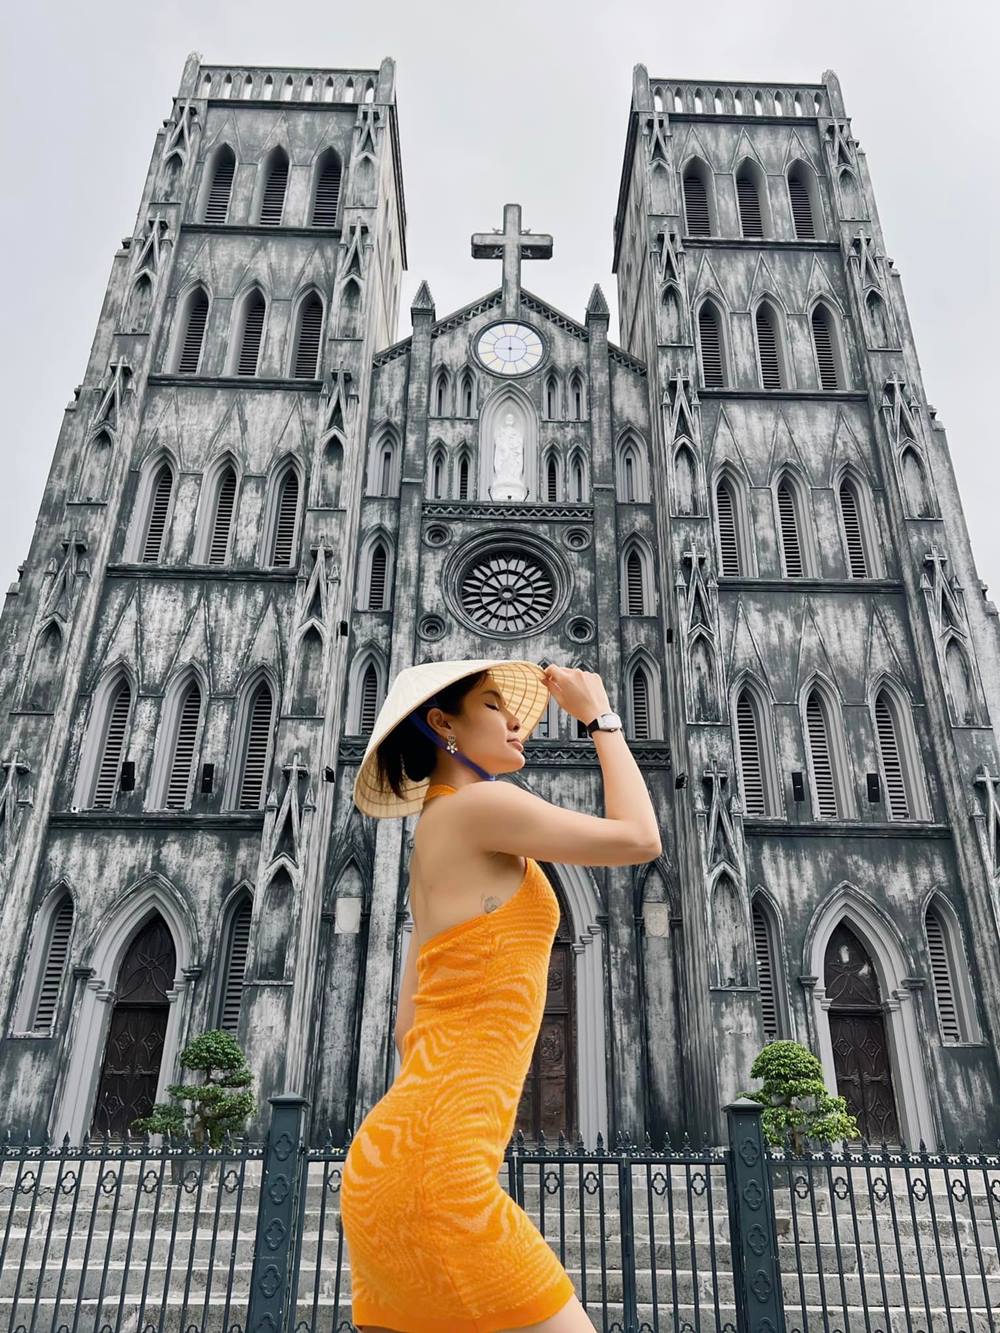 Being booed for wearing a dress showing off her back in front of the Cathedral, Phuong Trinh had to speak out - 1